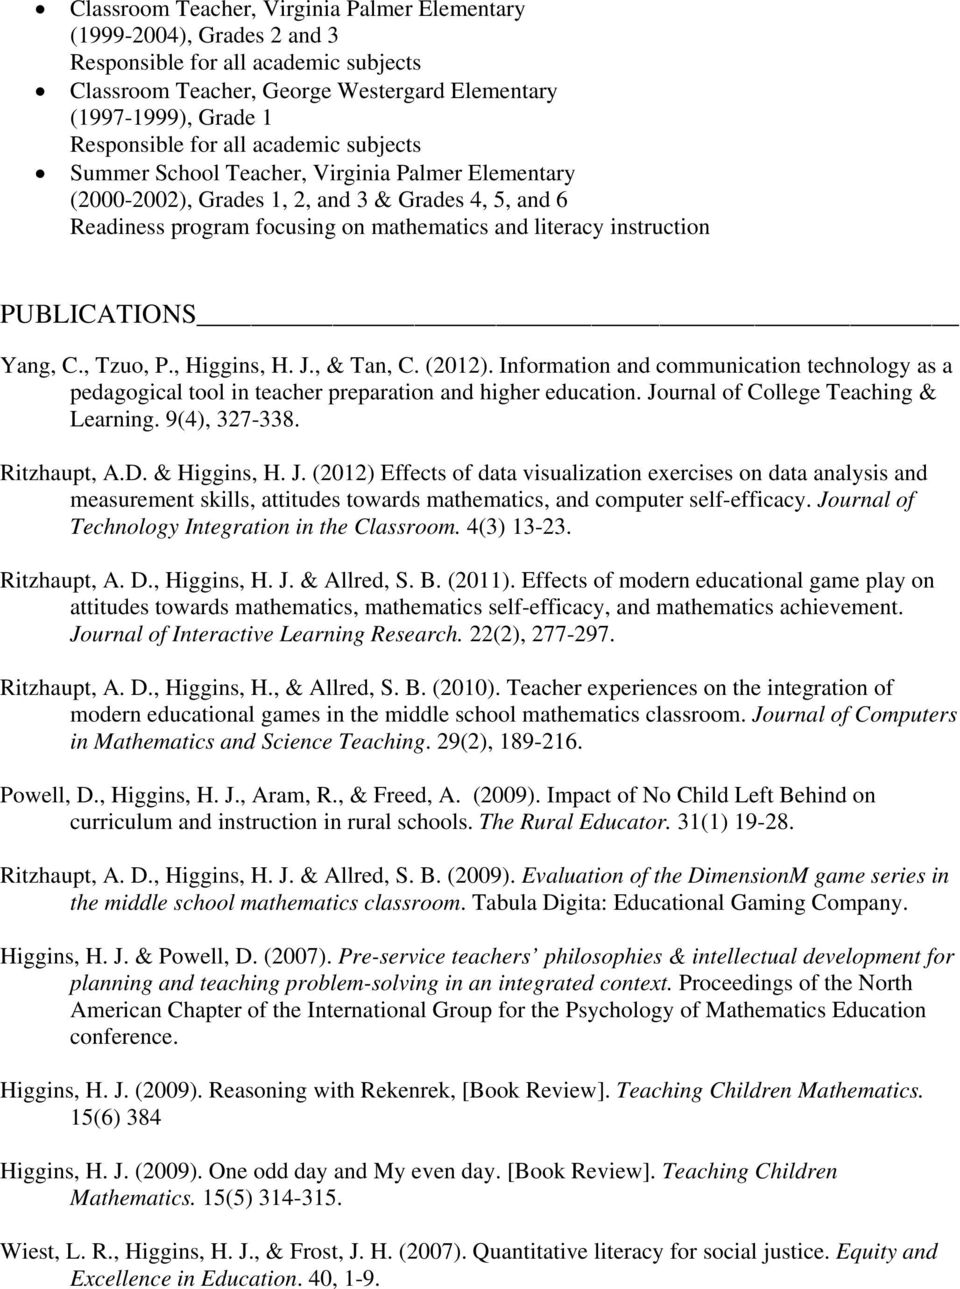 PUBLICATIONS Yang, C., Tzuo, P., Higgins, H. J., & Tan, C. (2012). Information and communication technology as a pedagogical tool in teacher preparation and higher education.